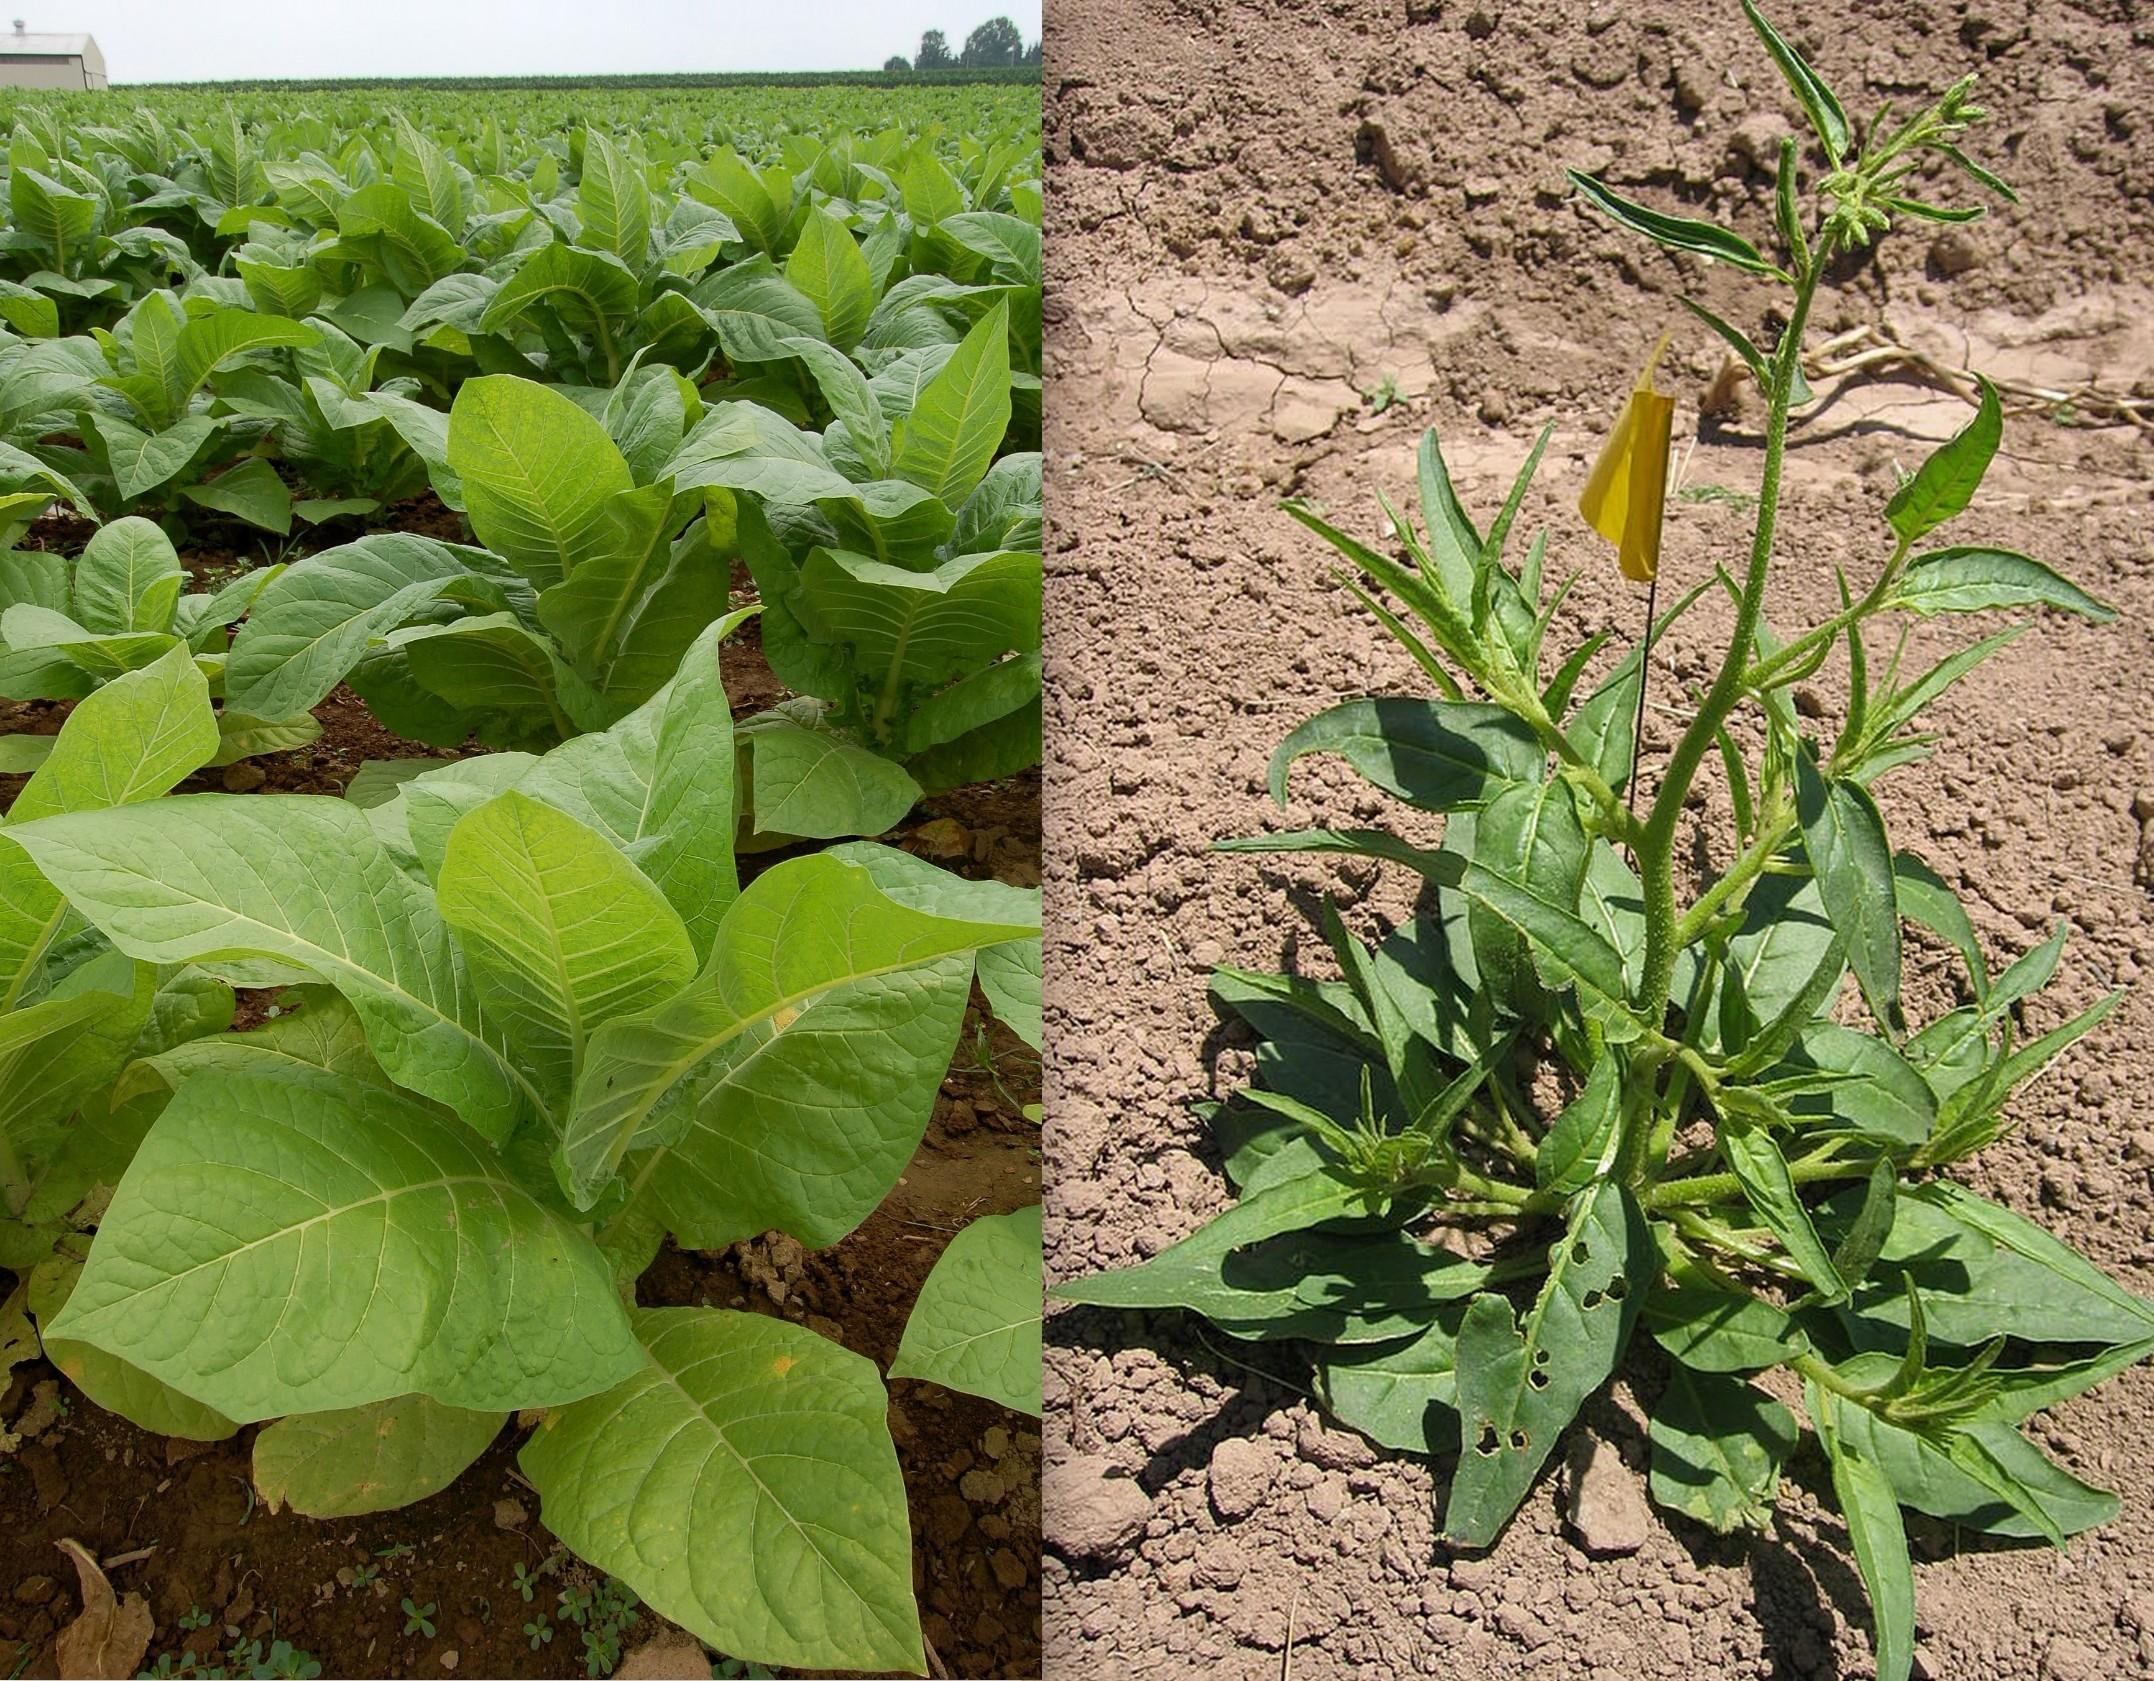 Commercially-grown tobacco (left) looks very different from the wild variety found in parts of the American West. CREDIT LEFT: DEREK RAMSEY RIGHT: KGROTEN